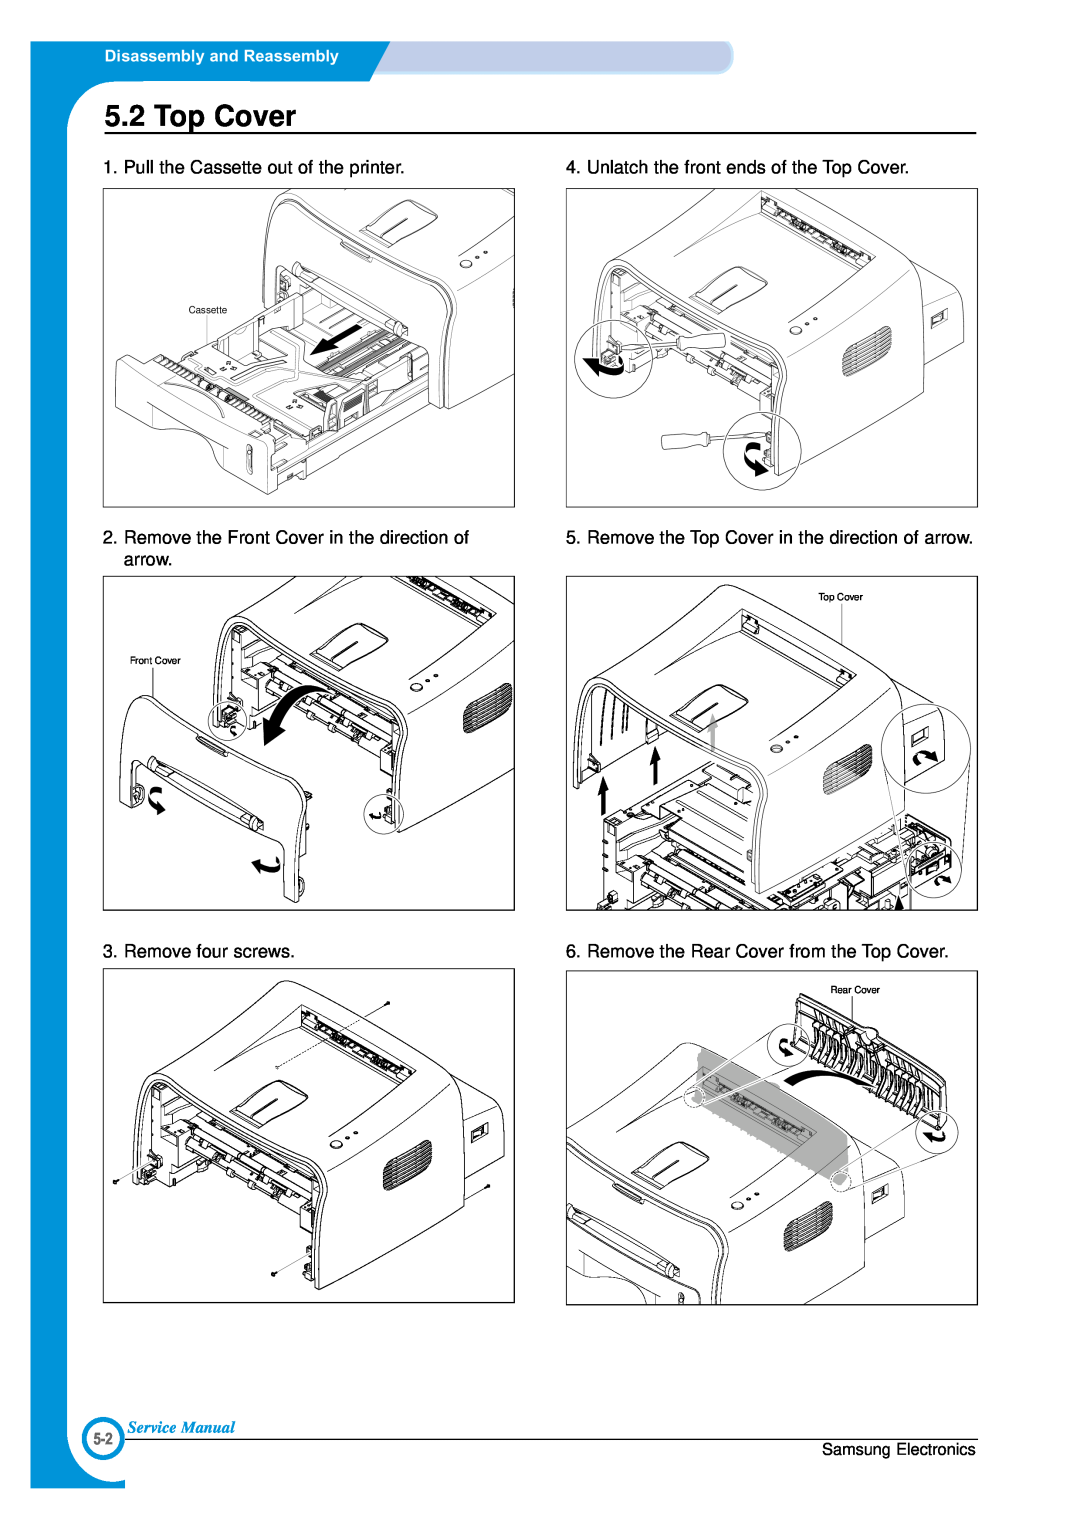 Samsung ML-1700 Top Cover, Disassembly and Reassembly, Service Manual, Samsung Electronics, Cassette, Front Cover 